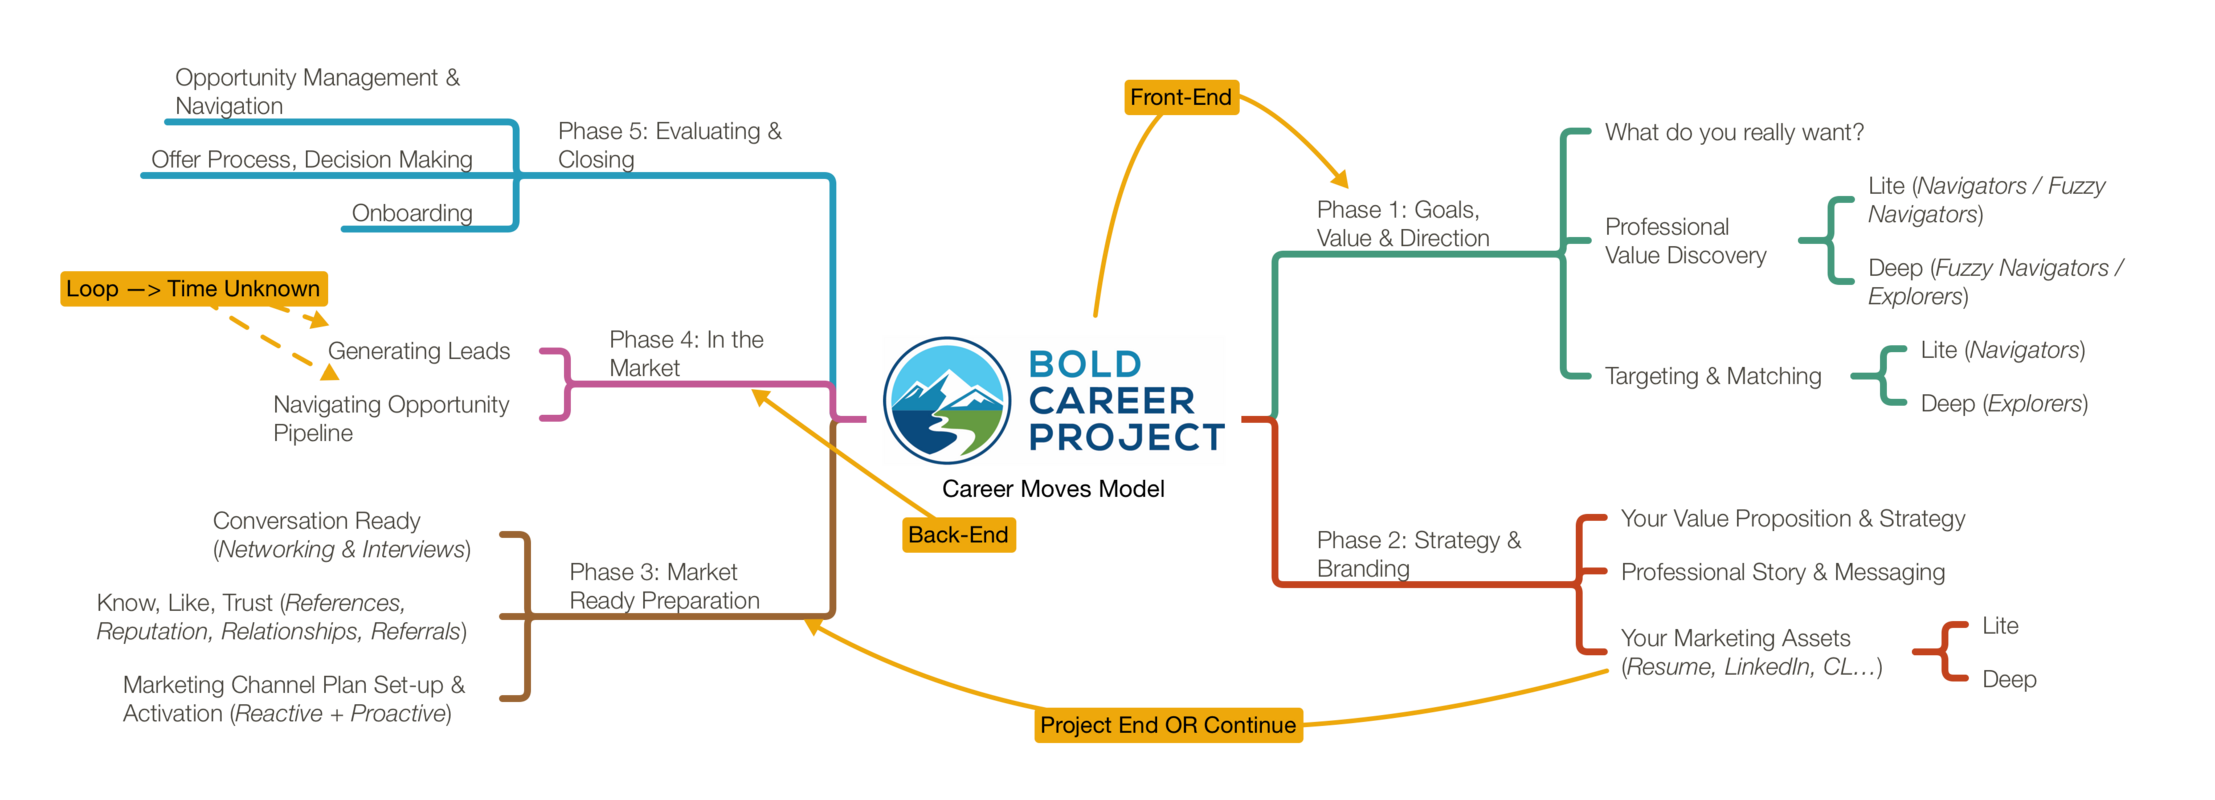 Bold Career Project_Career Move Process v2